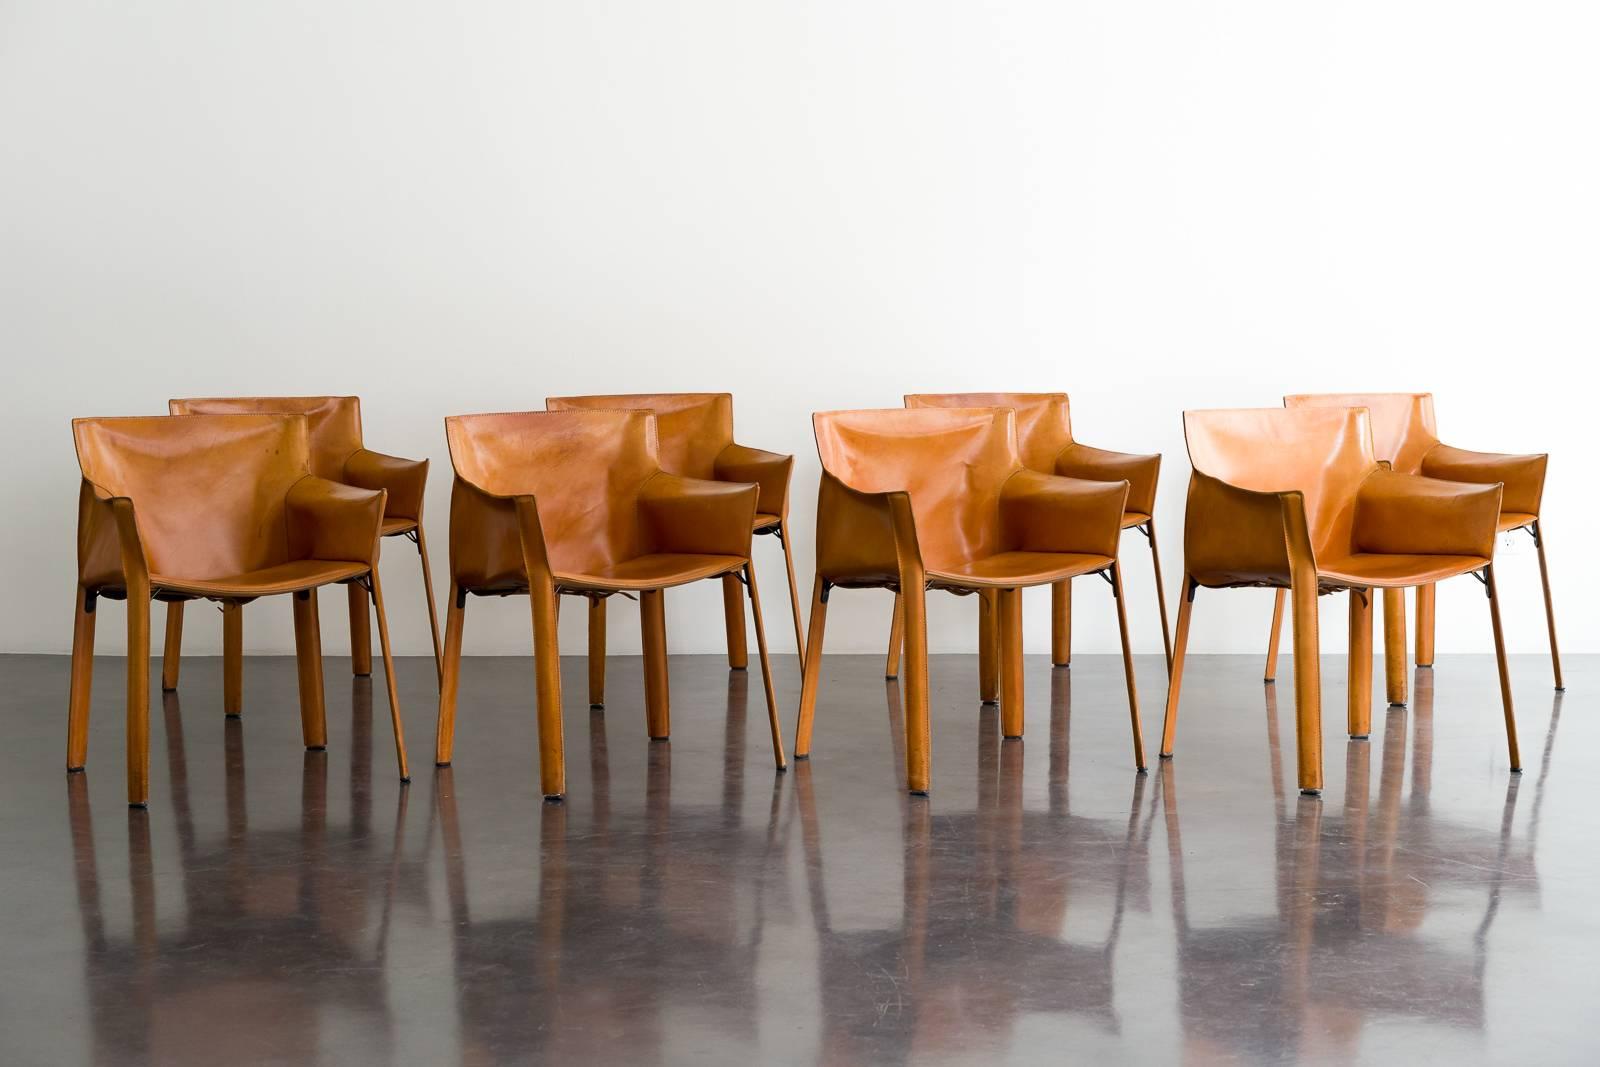 A beautifully patinated set of eight saddle leather armchairs designed by Giancarlo Vegni for Fasem in 1982. A more modern and graceful design than the CAB chairs by Mario Bellini from the decade prior, the similarly stitched hide over steel frame